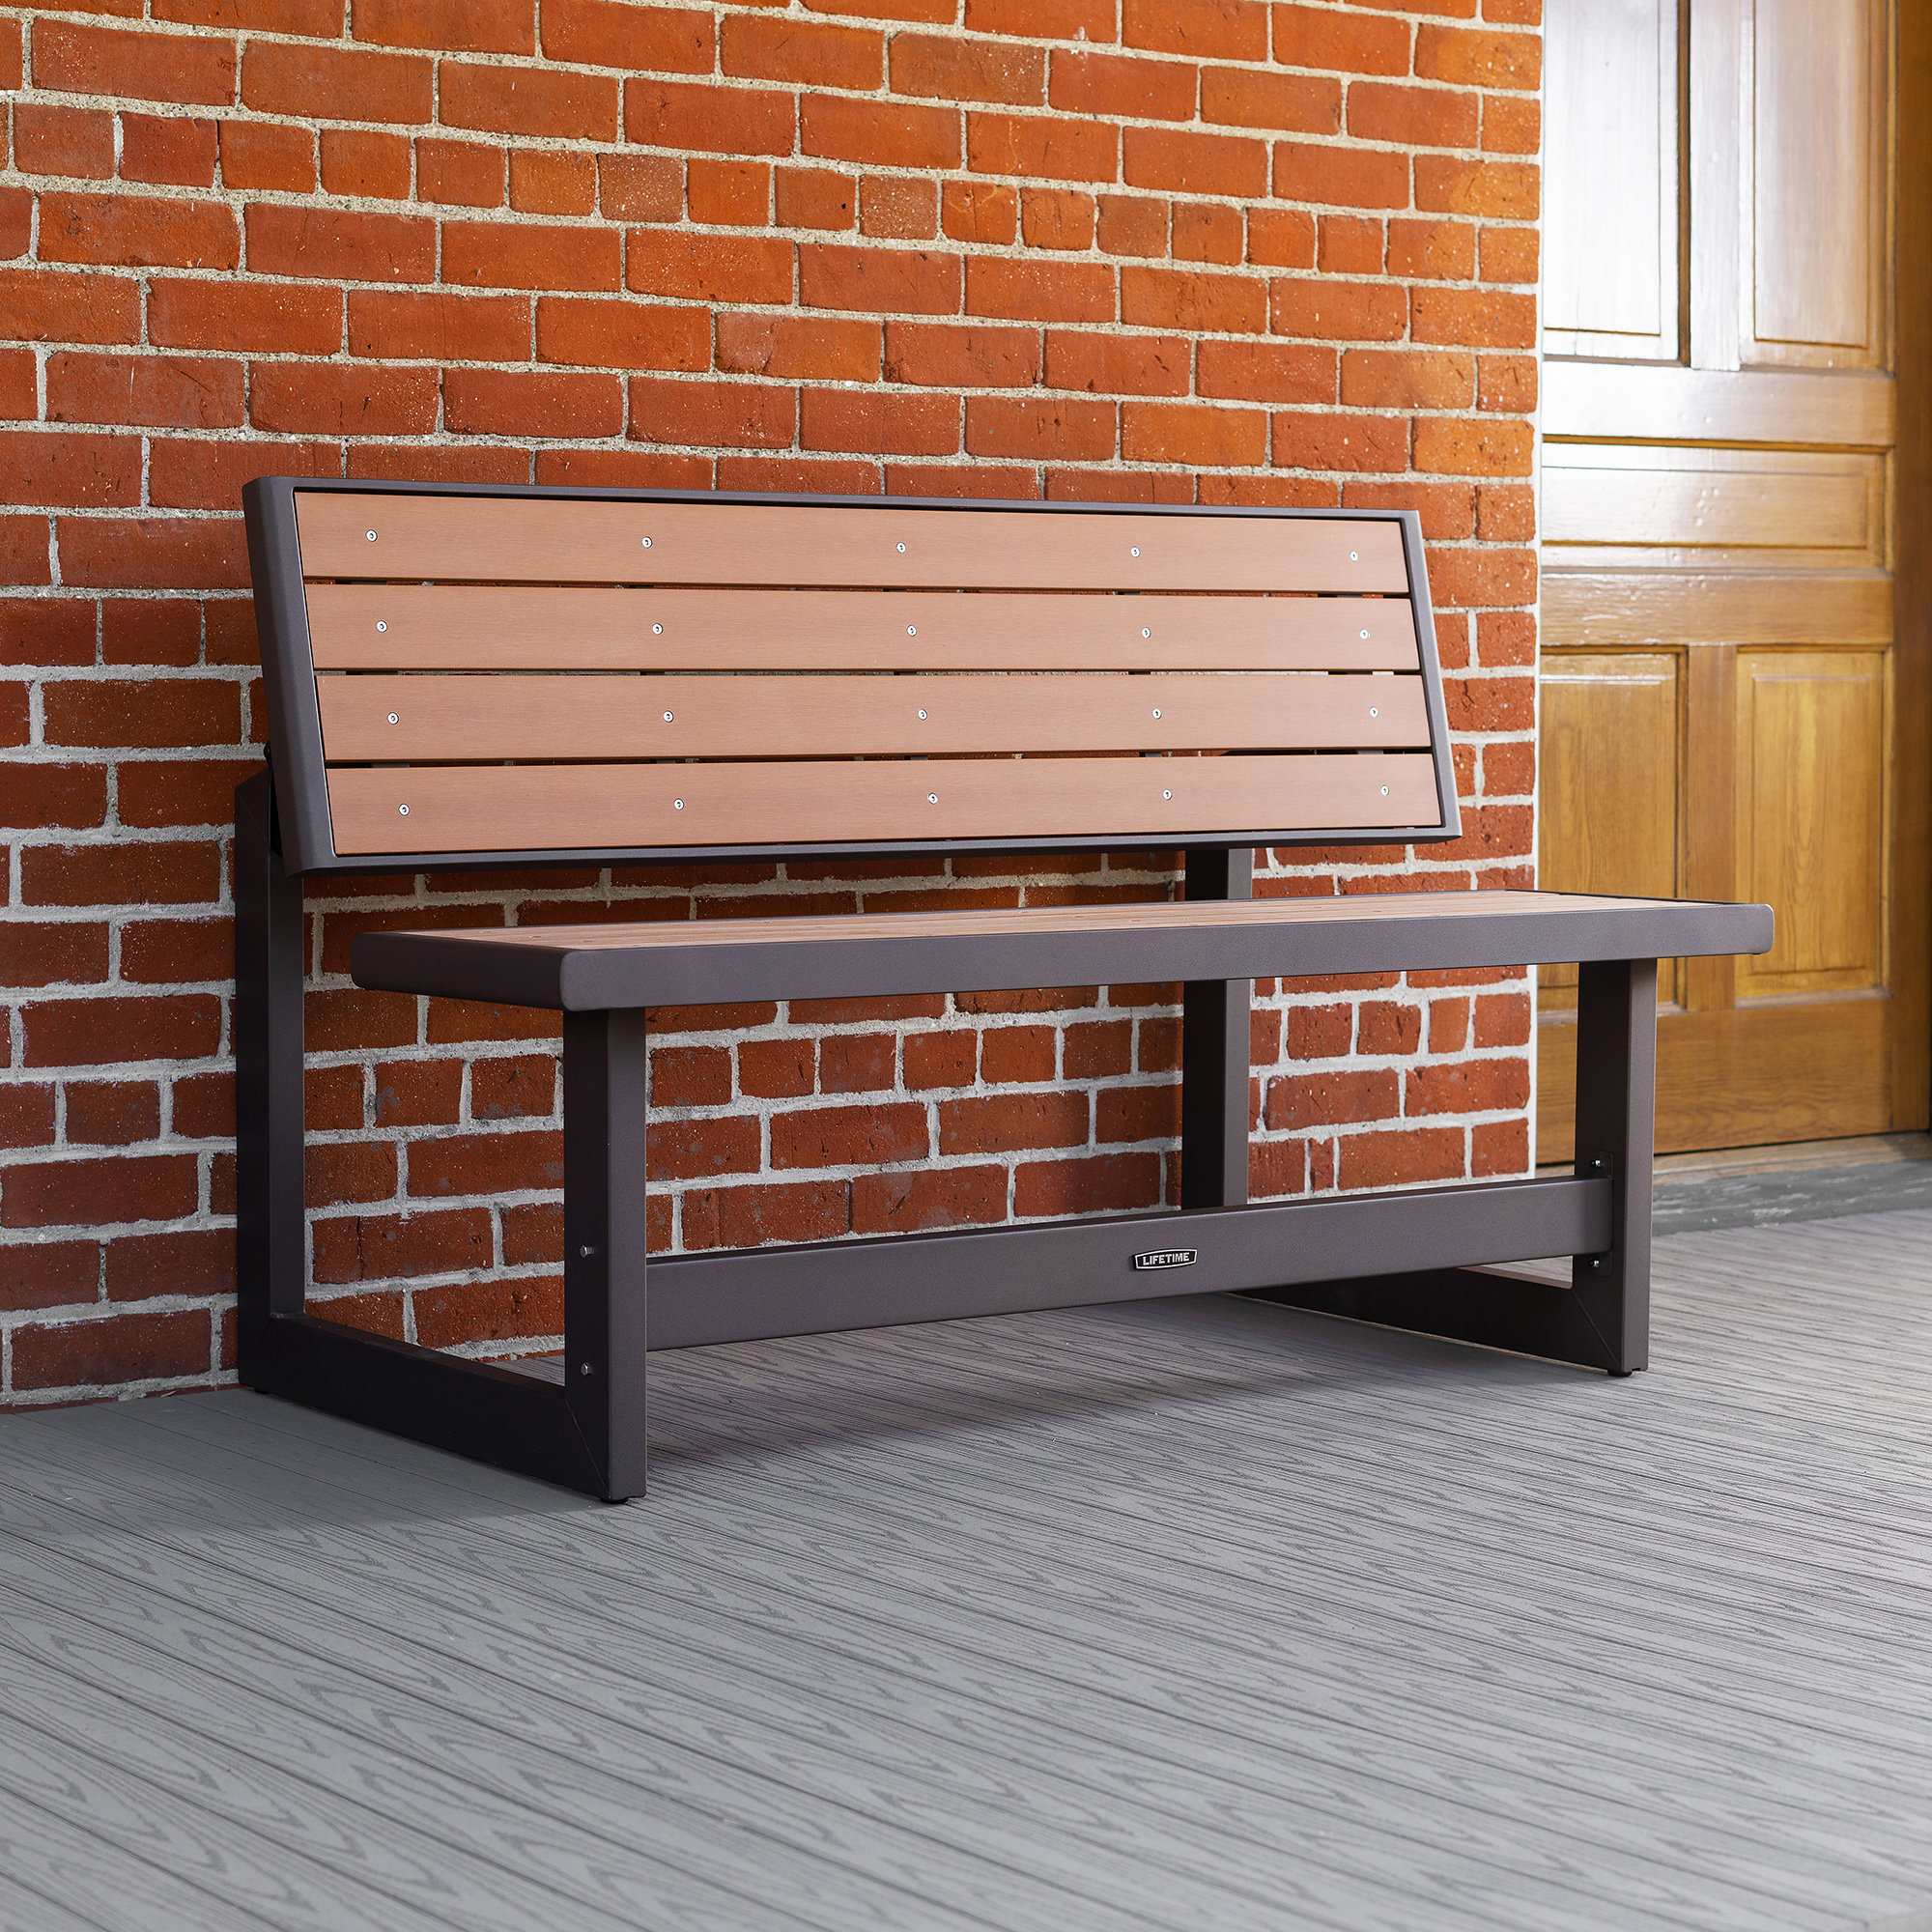 Lifetime Outdoor Convertible Bench, Brown - image 2 of 10